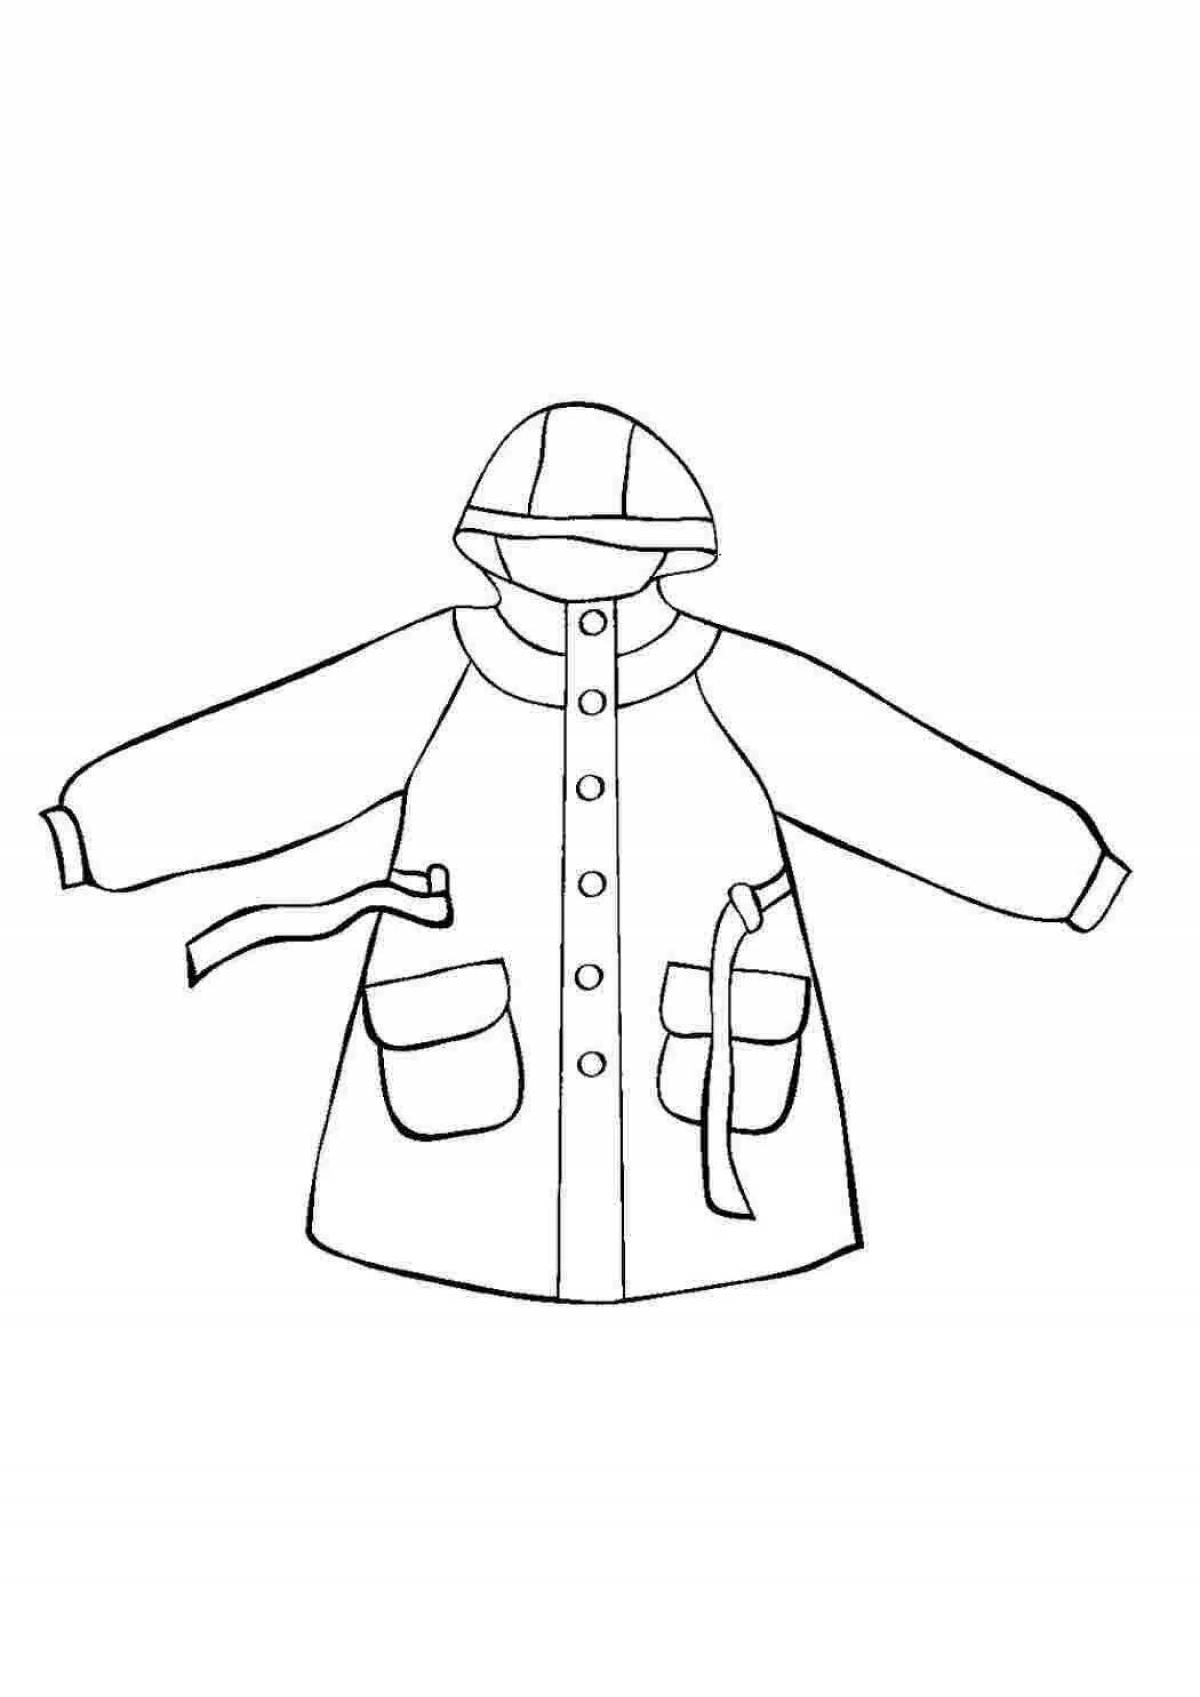 Exciting outerwear coloring